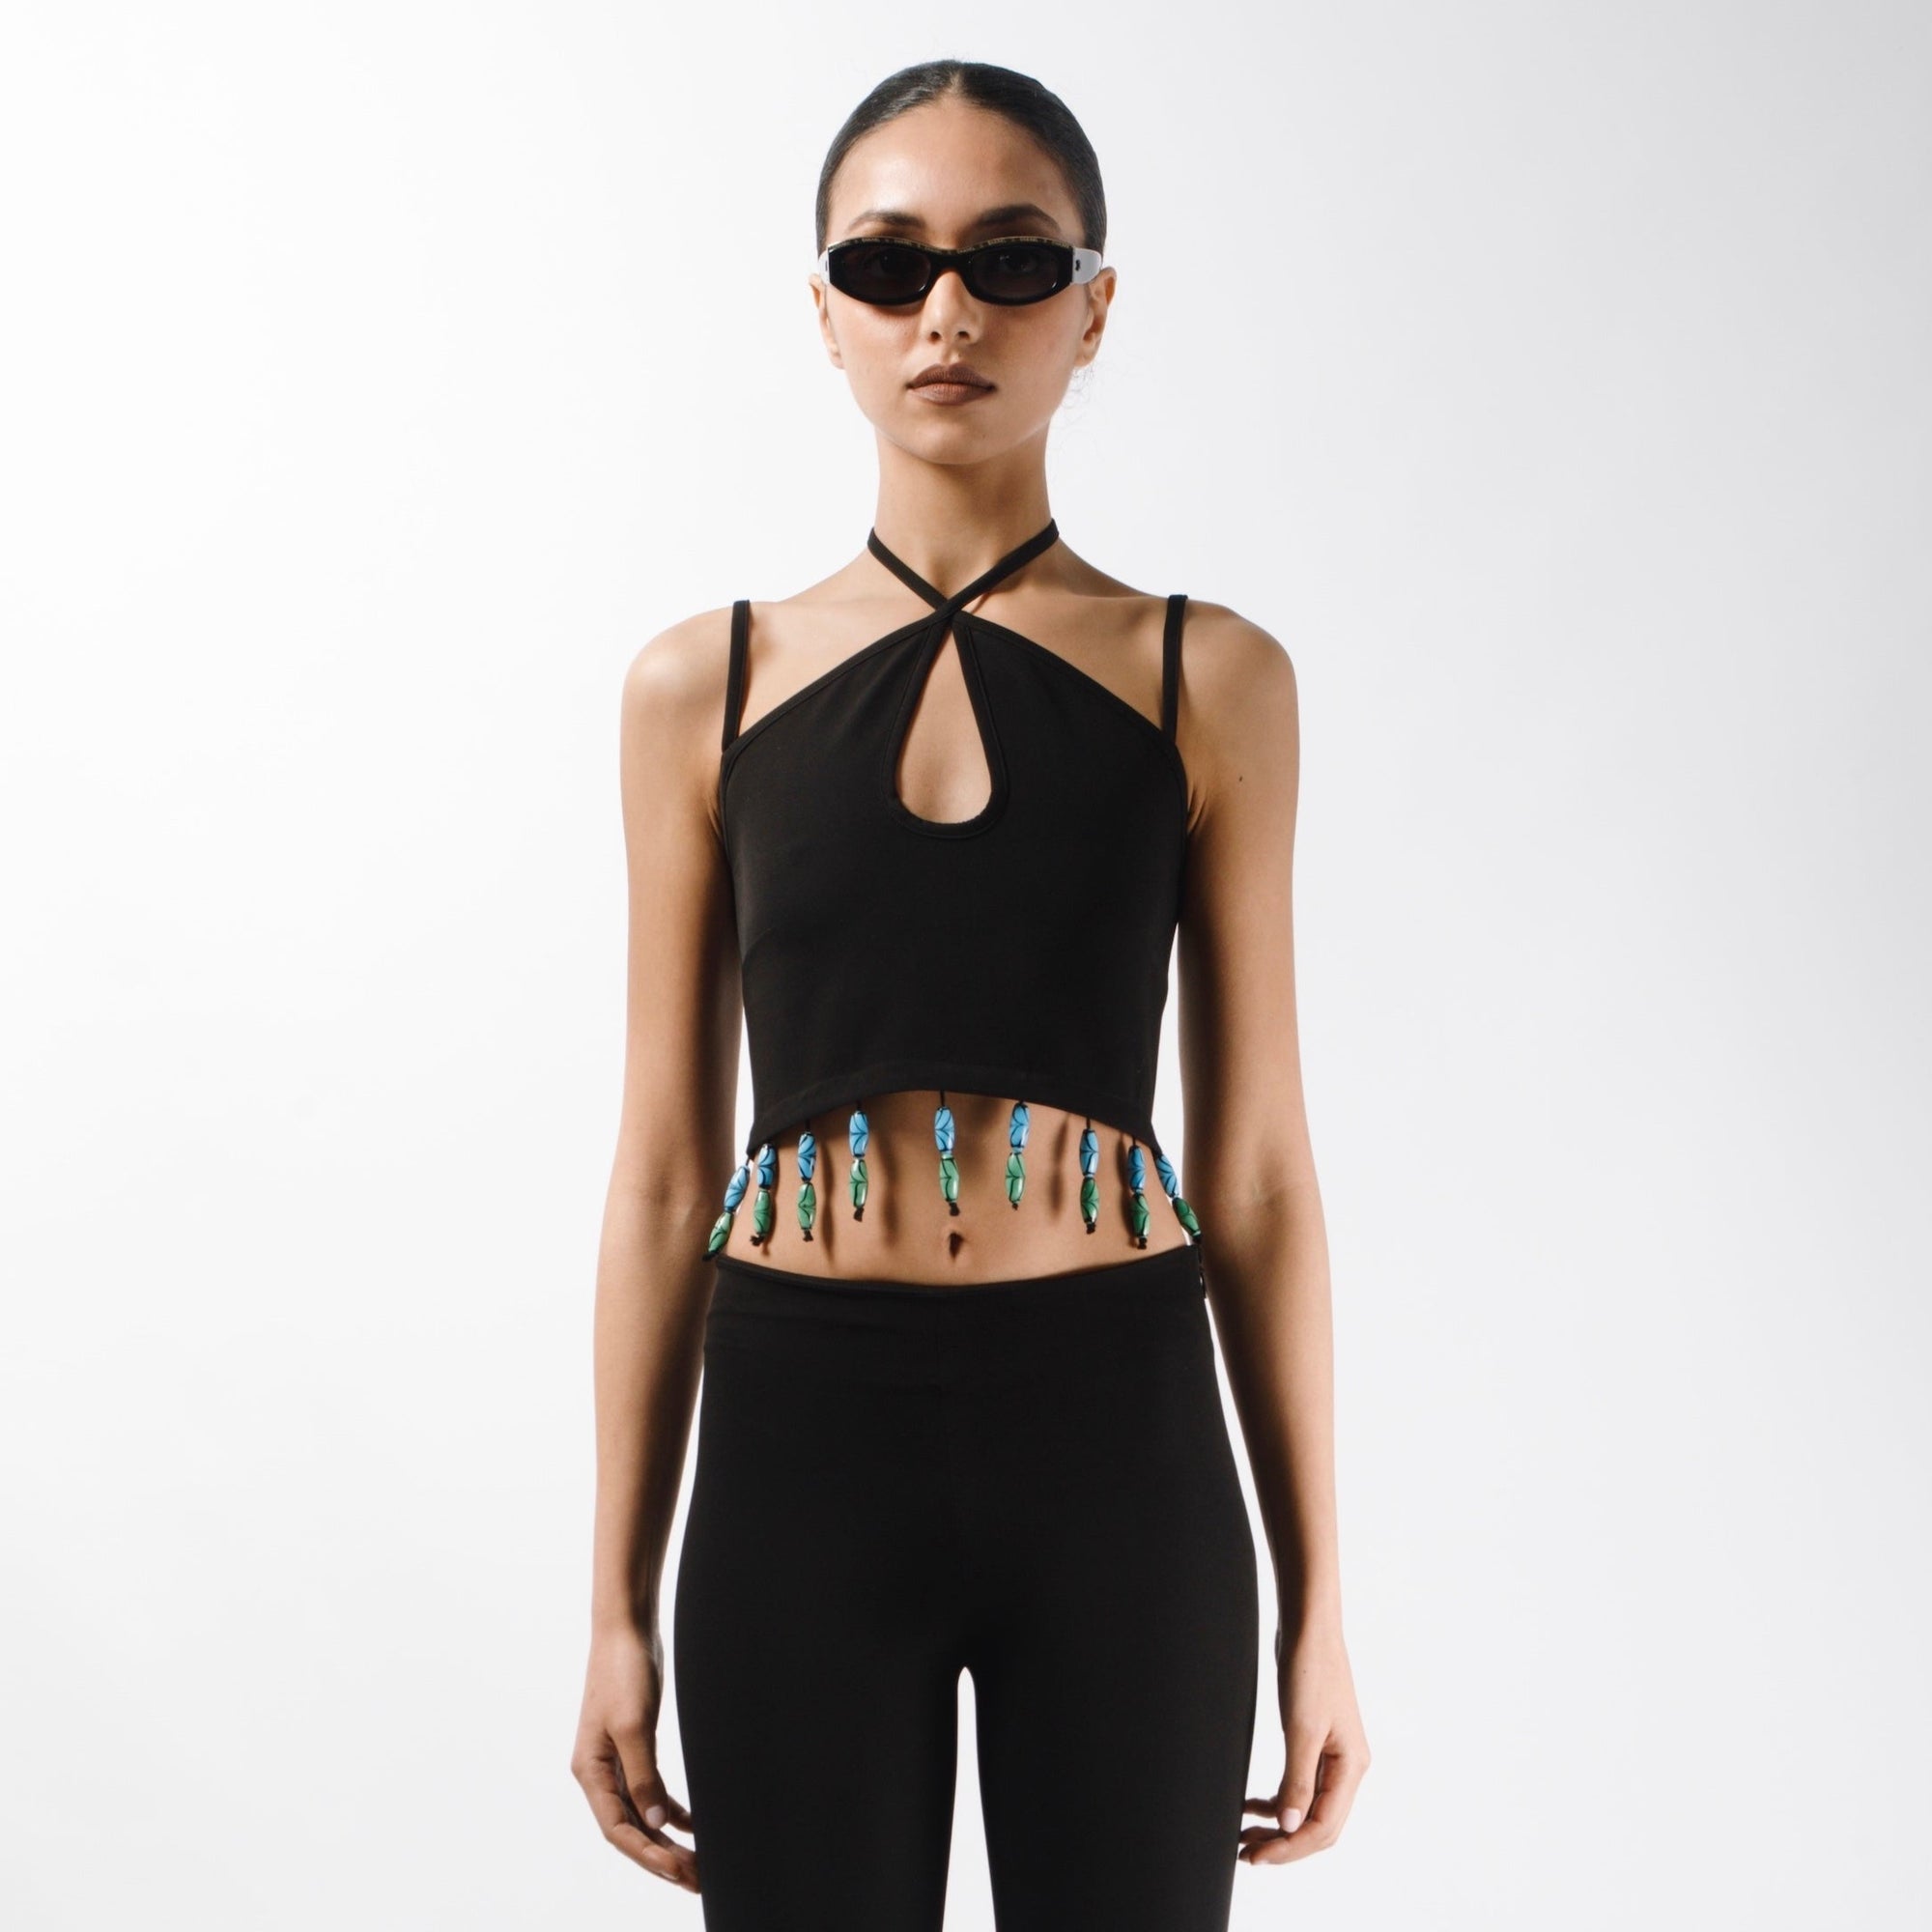 Fitted Crop top with crossed tie strap and thin bretelles, embelished with bead fringes on the hem and a zip on the back - front